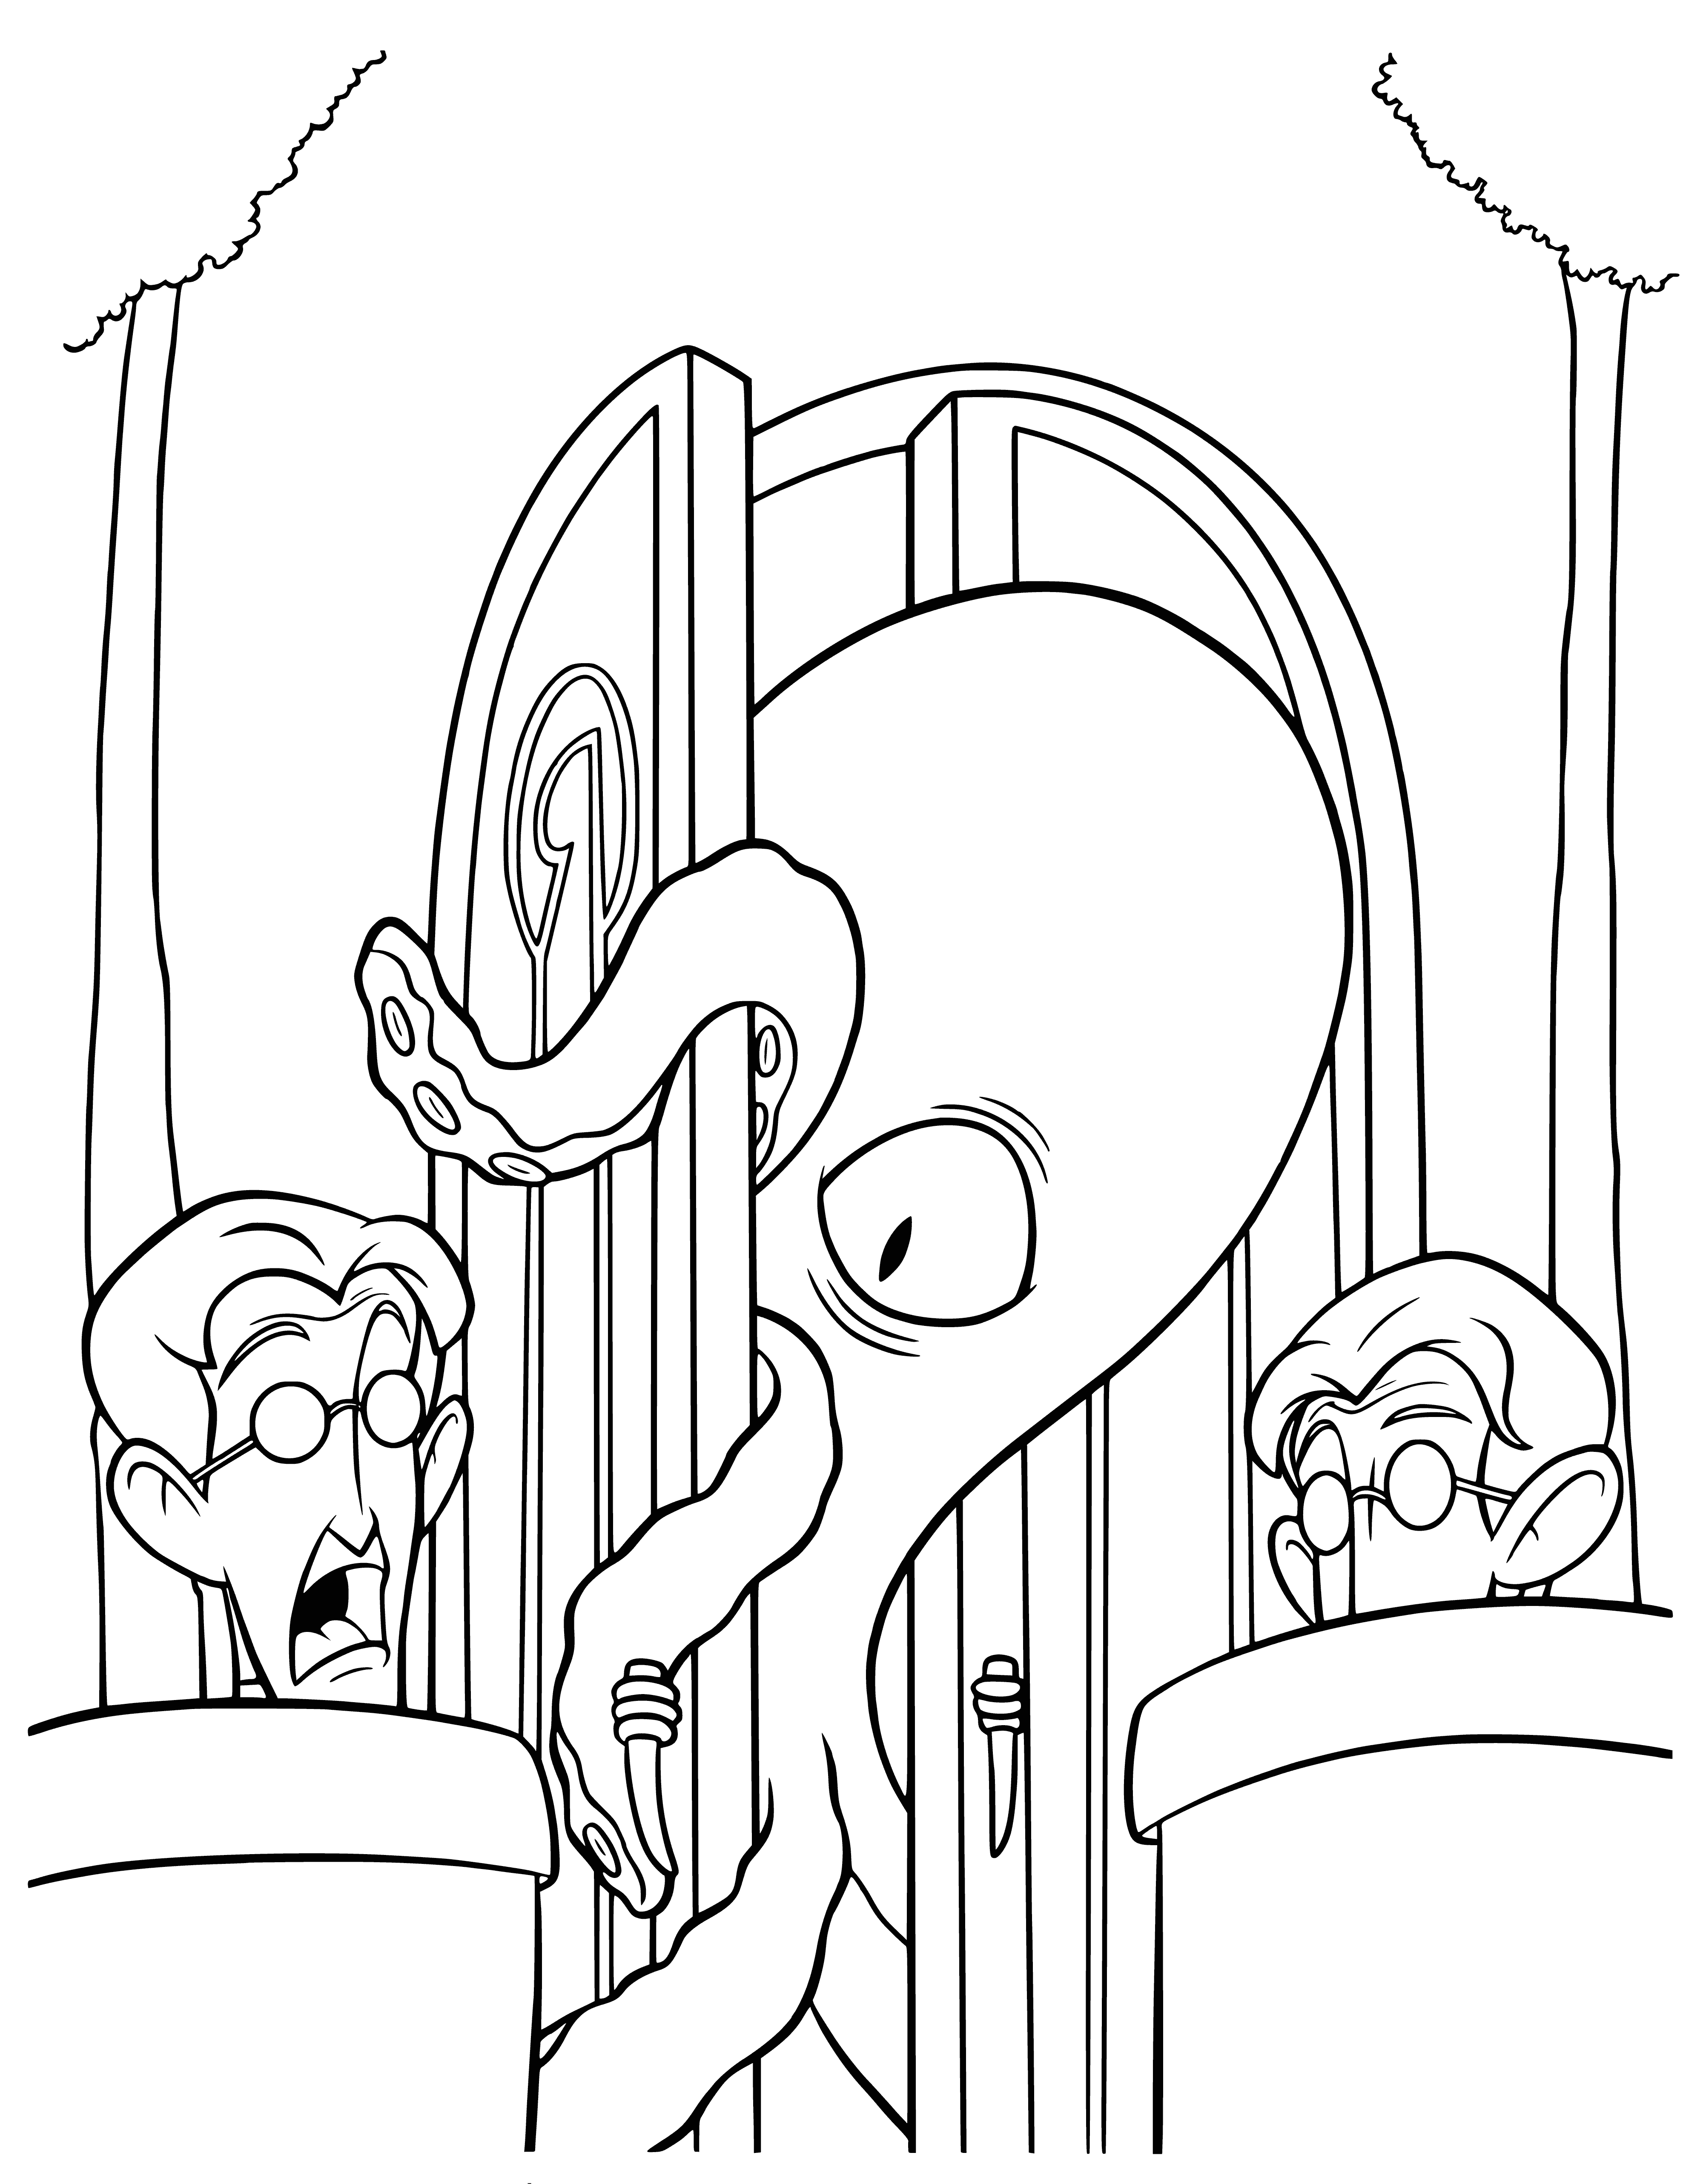 coloring page: An octopus, brown and white, with 8 legs, swimming in the water, in a coloring page. #coloringpage #octopus